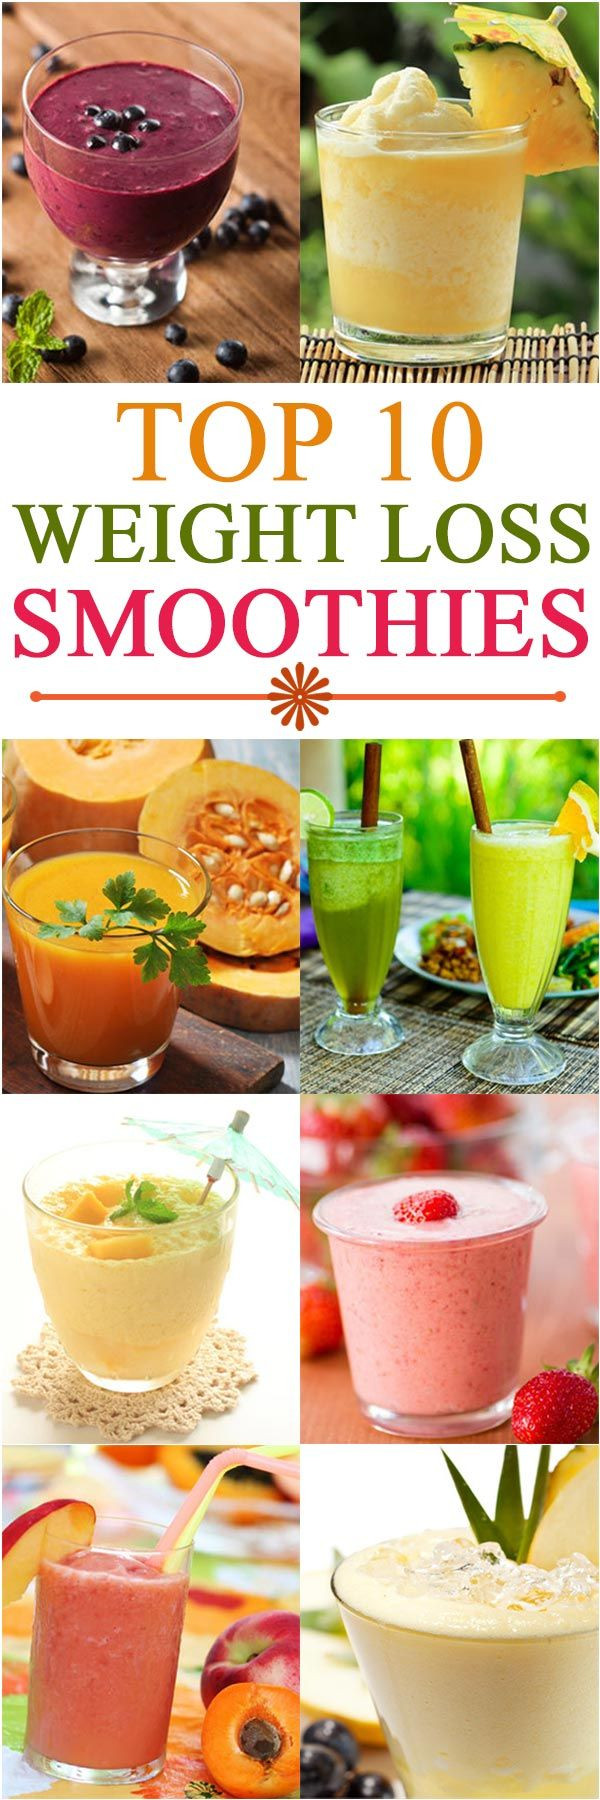 Weight Loss Smoothies Ingredients
 Pin on Healthy living